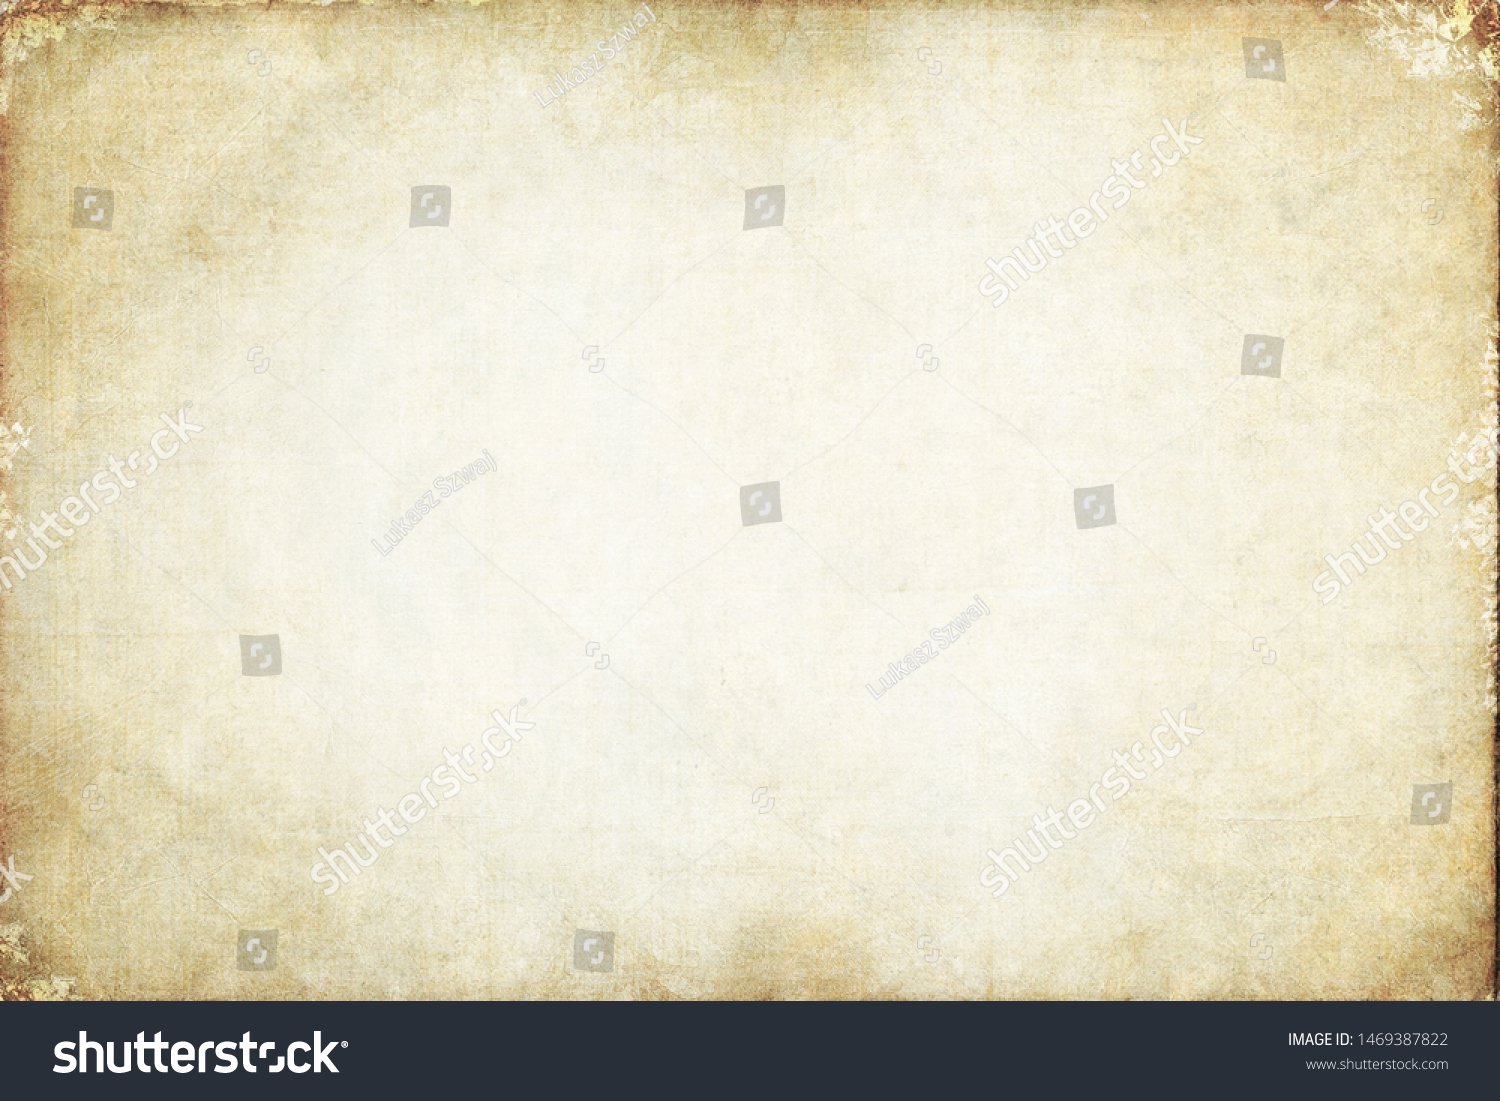 Old Paper texture space for graphics and text #1469387822